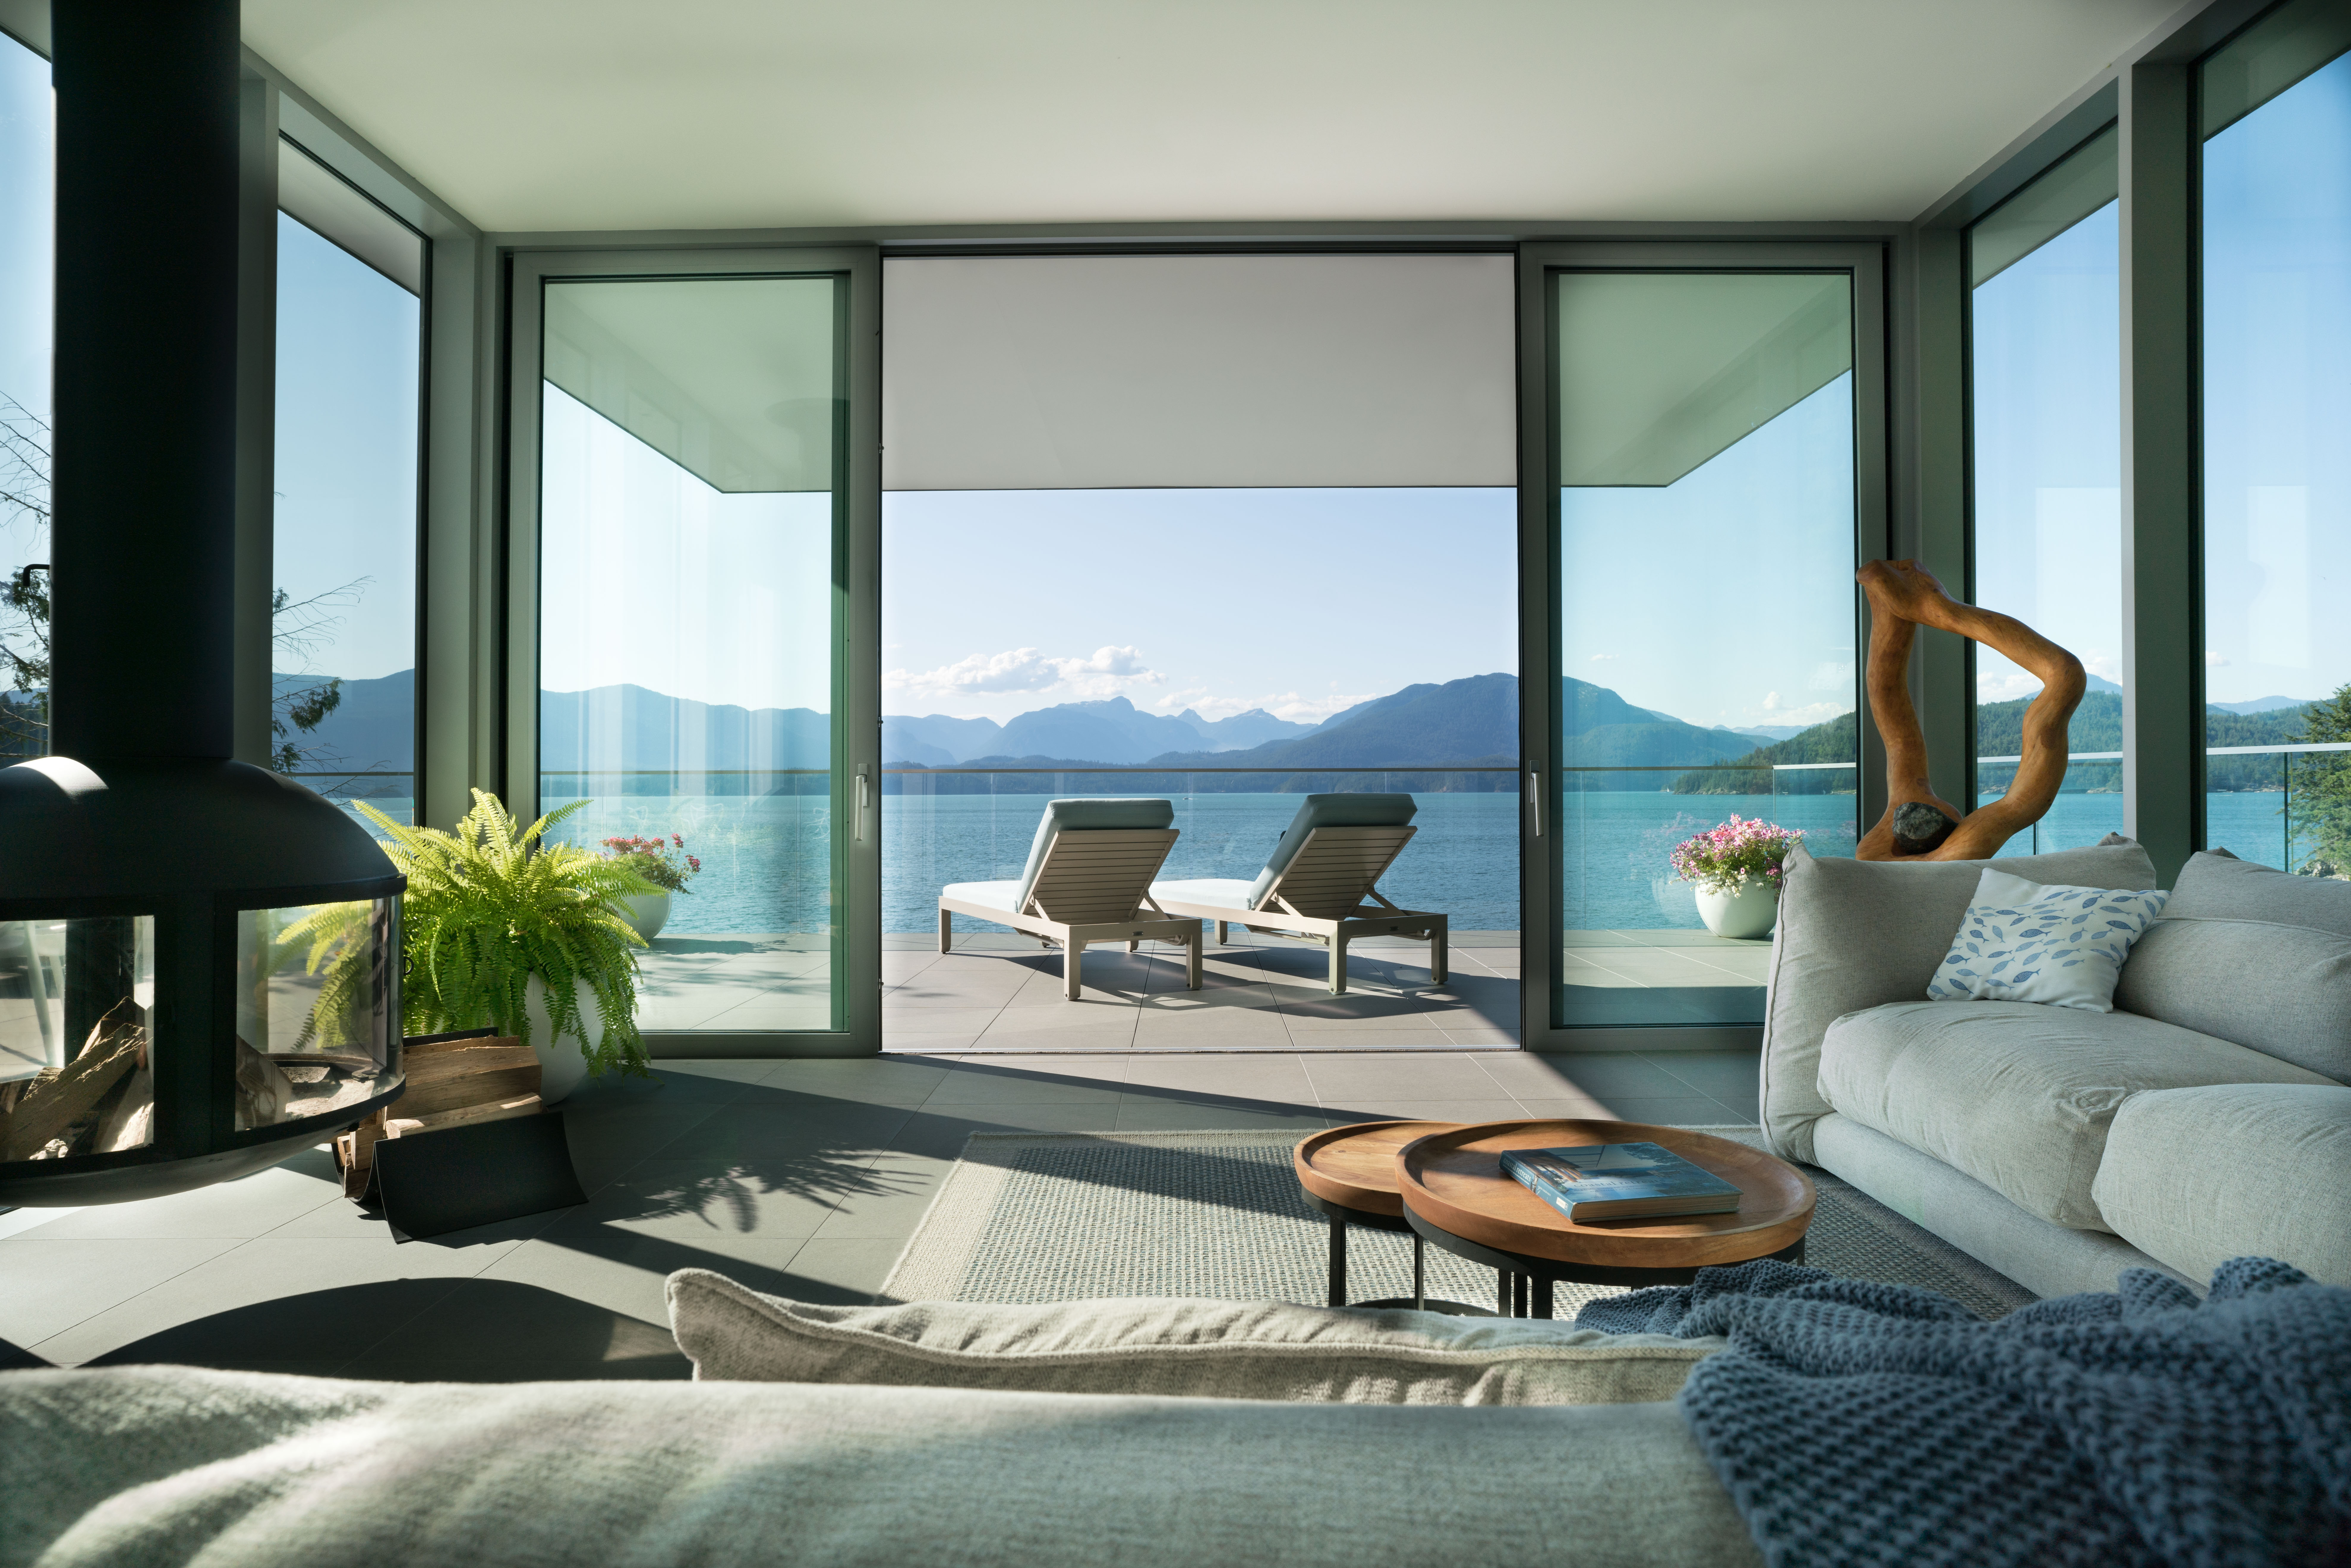 Contemporary living room design with ocean view in a luxurious custom residence on Bowen Island.